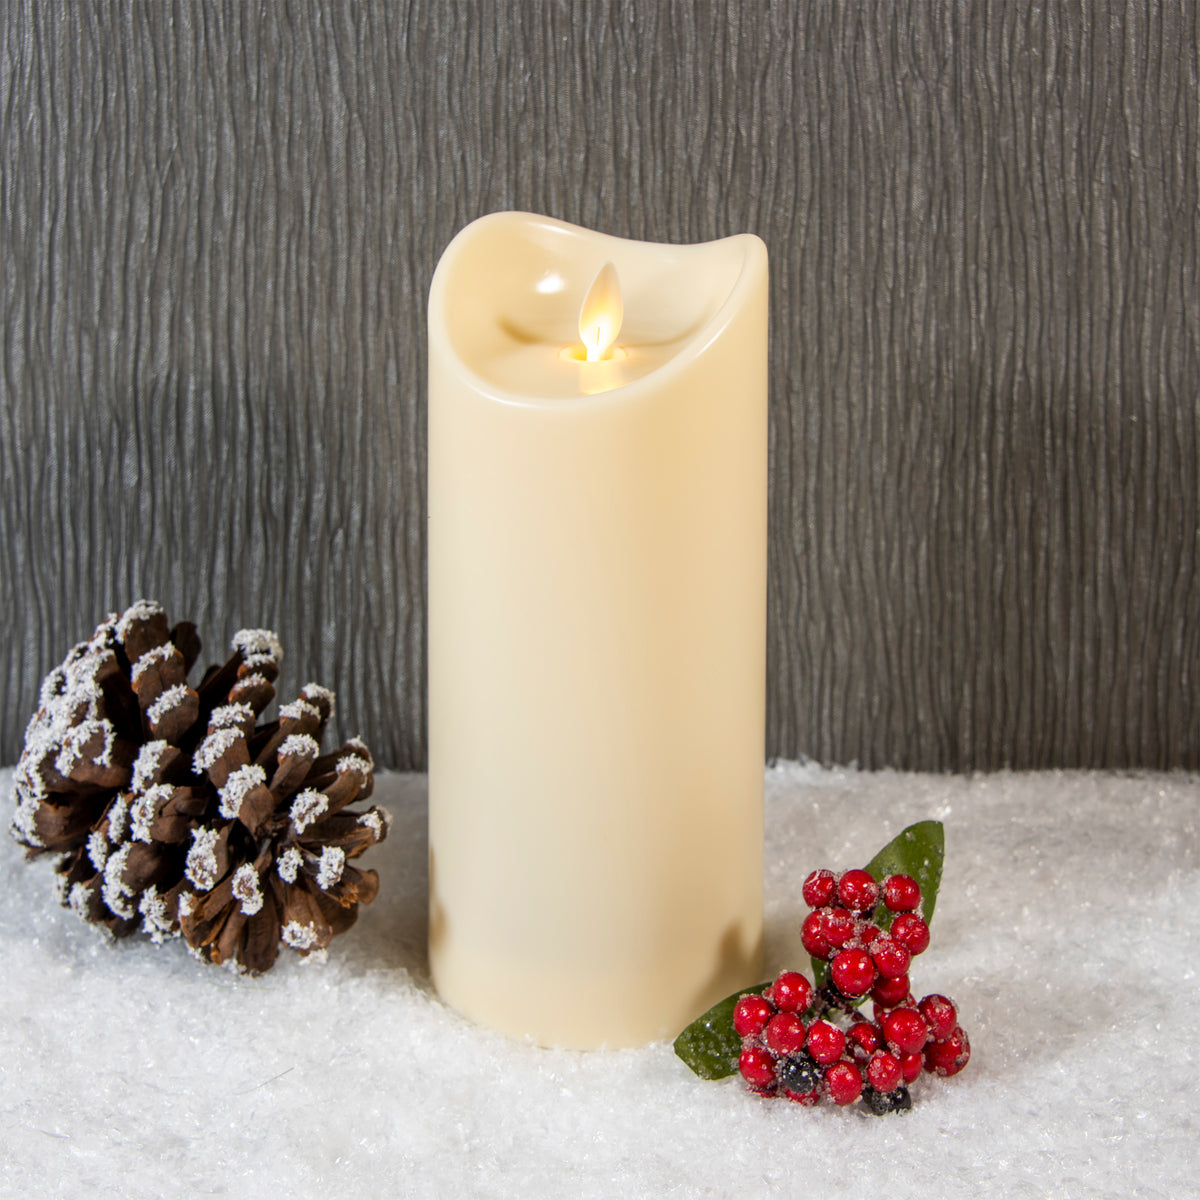 18.5cm Magic Moving Realistic Flame Candle